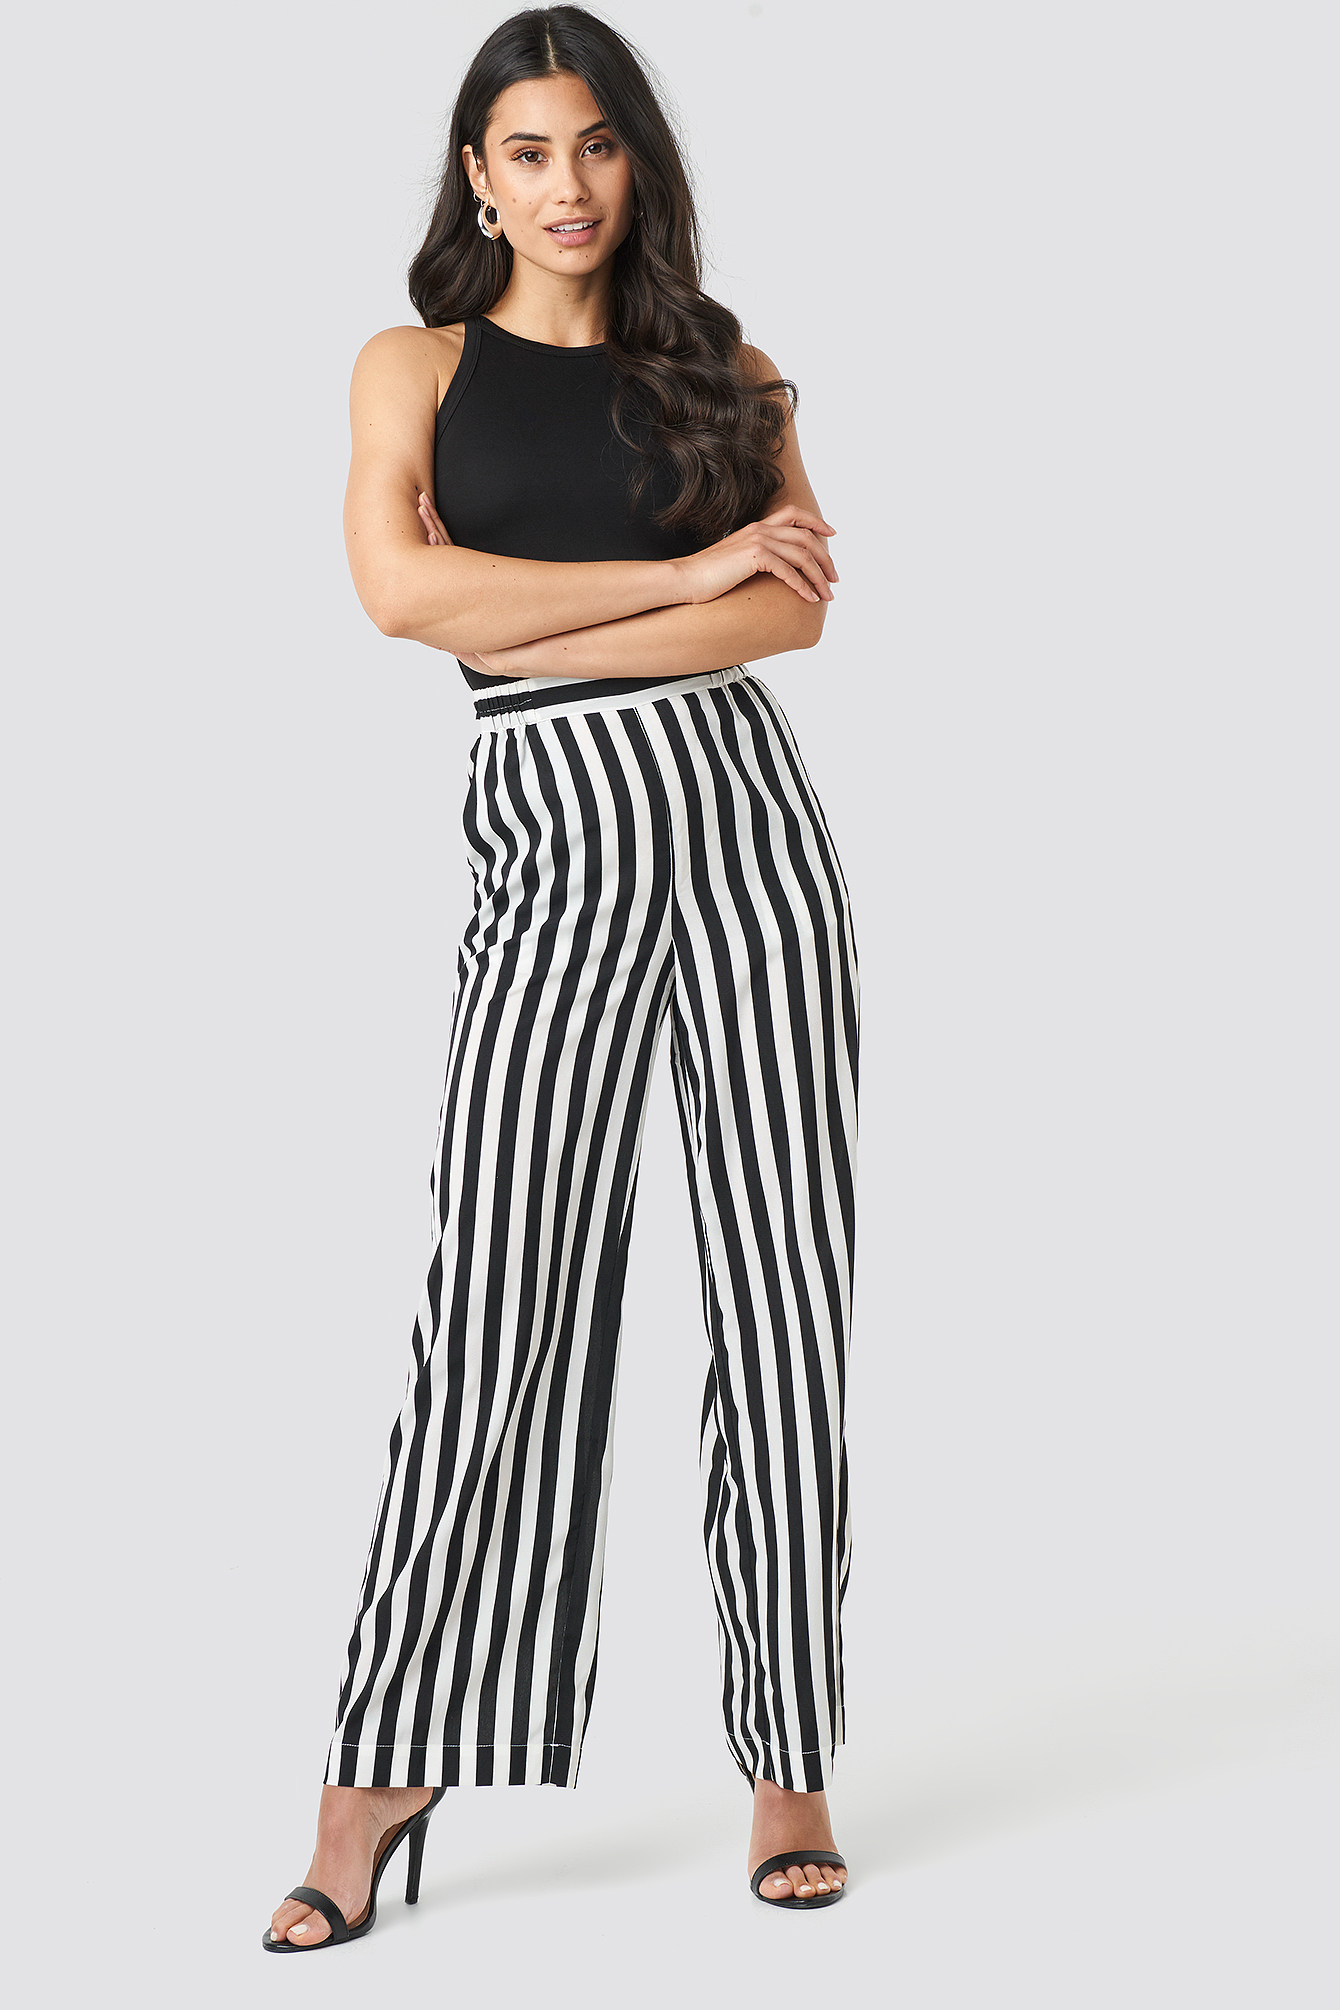 black and white striped pants for ladies